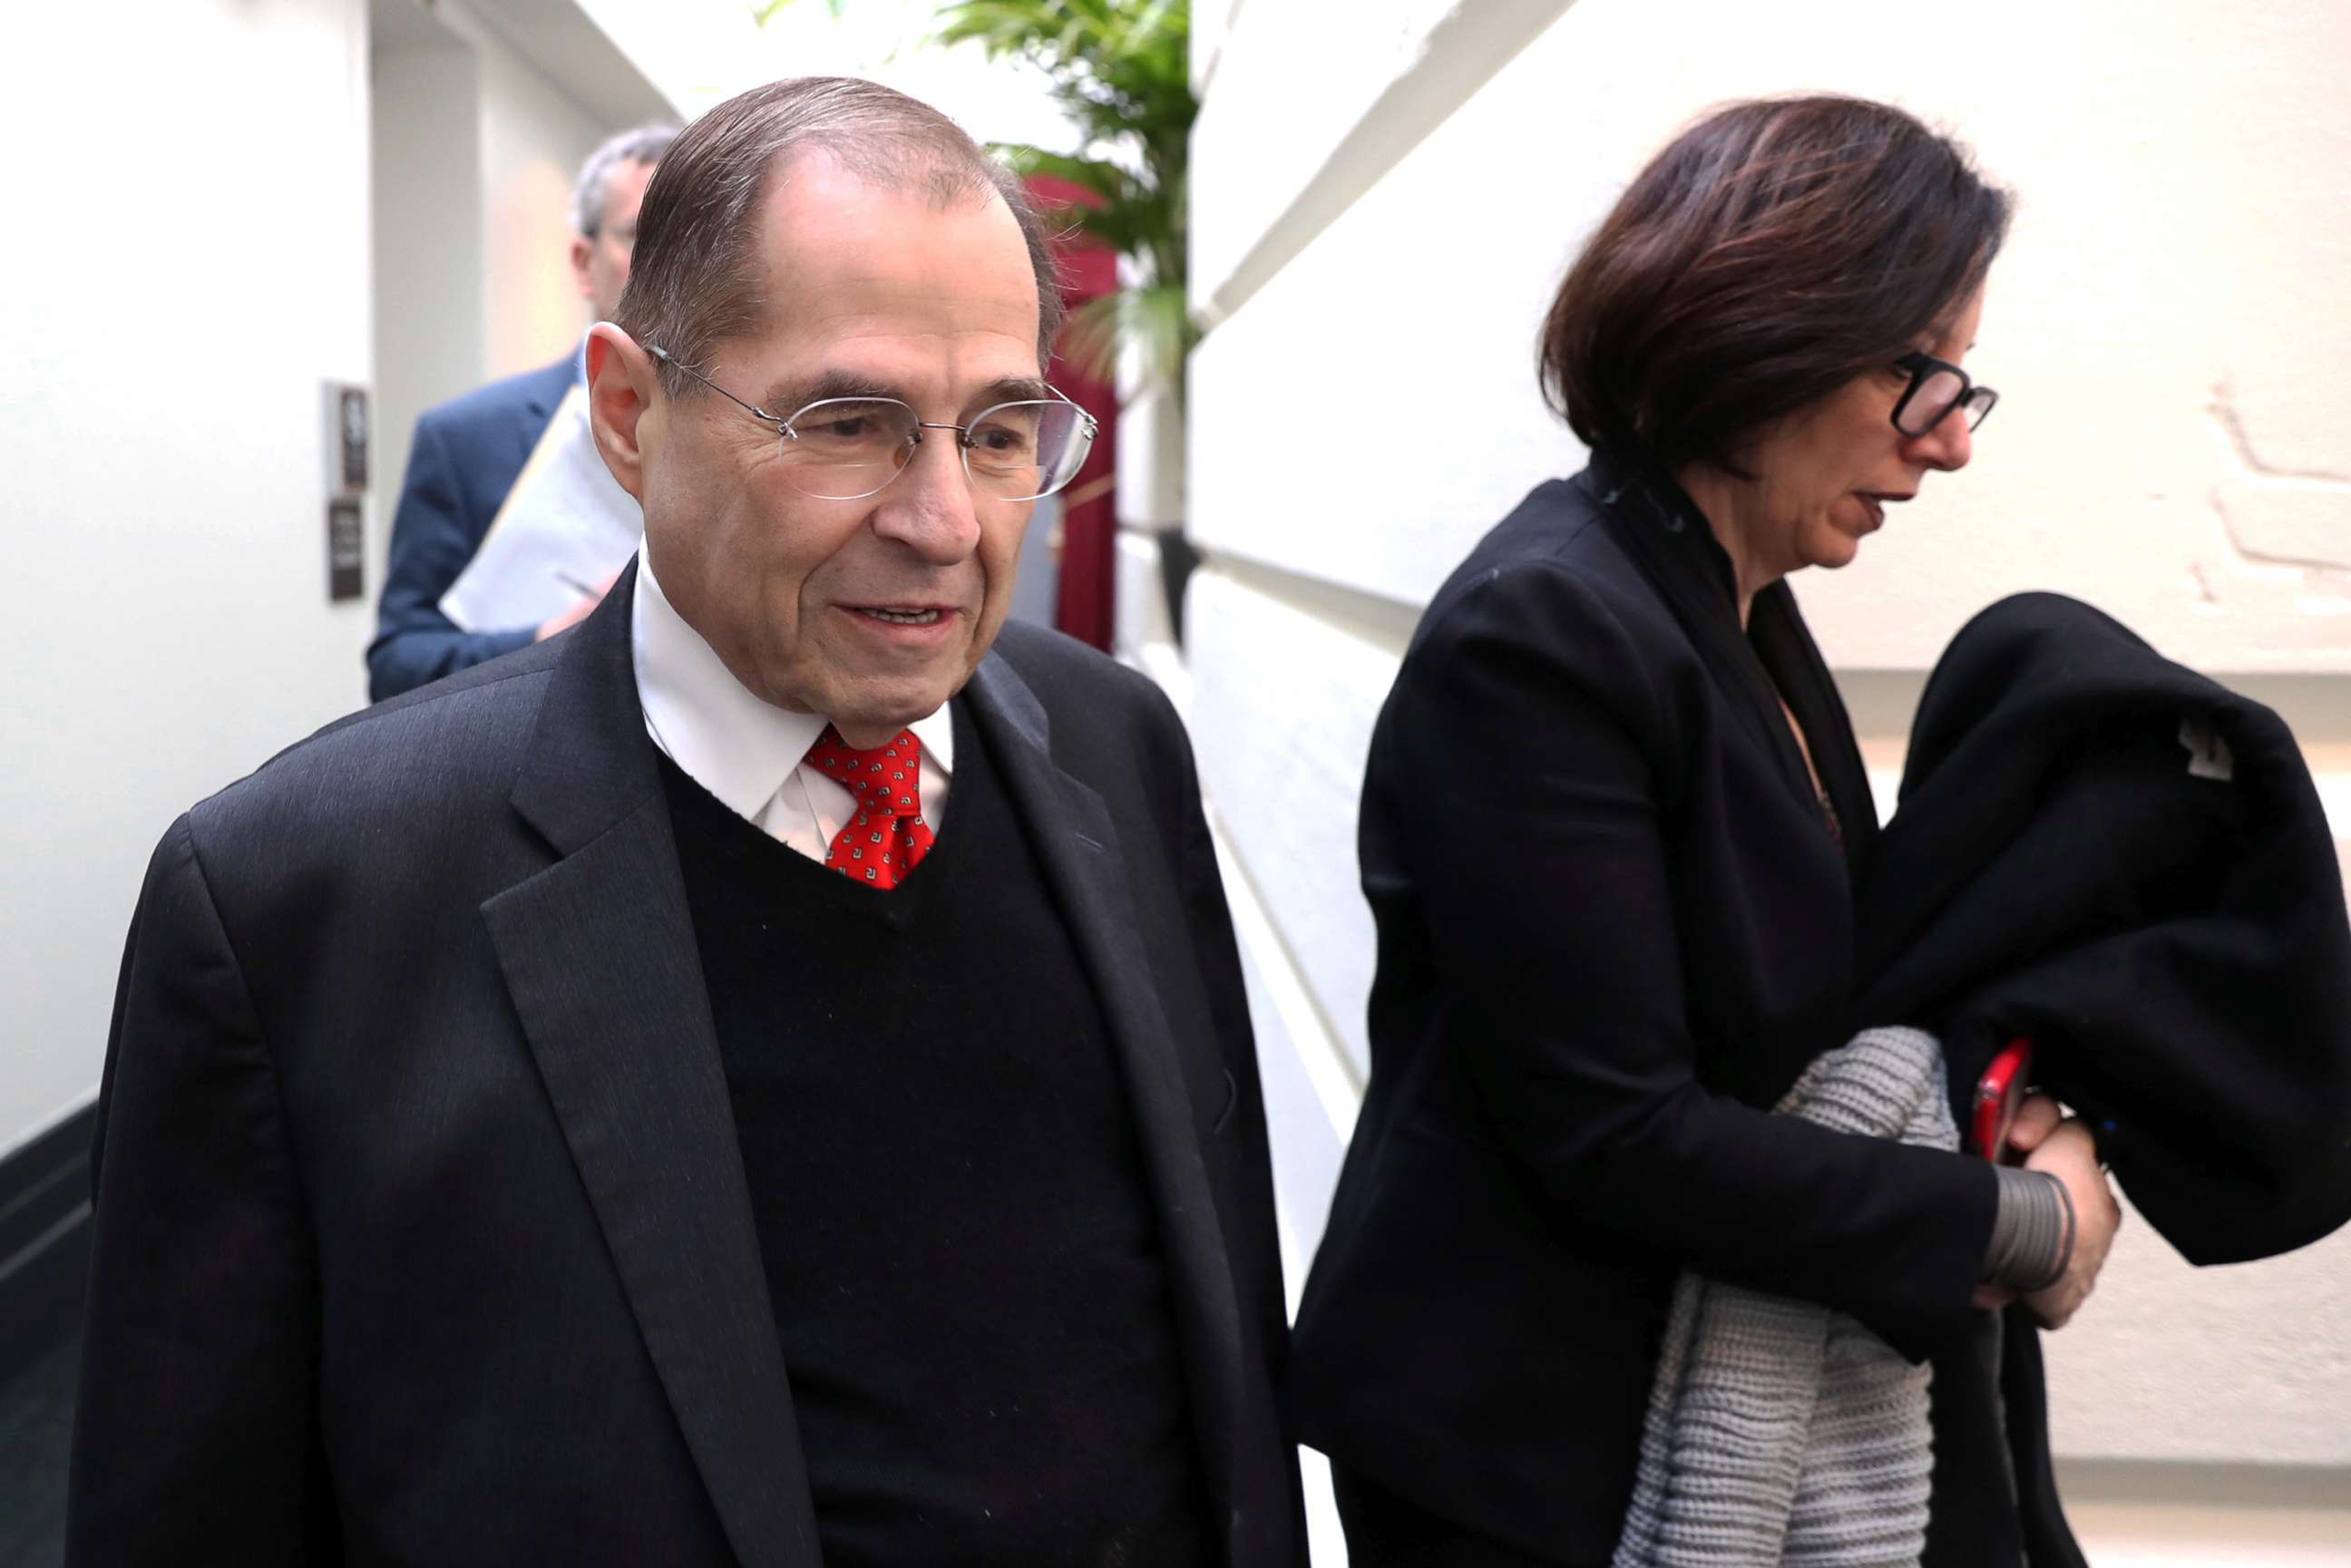 PHOTO: U.S. Representative Jerry Nadler arrives for a House Democratic party caucus meeting at the U.S. Capitol in Washington, Jan. 9, 2019.